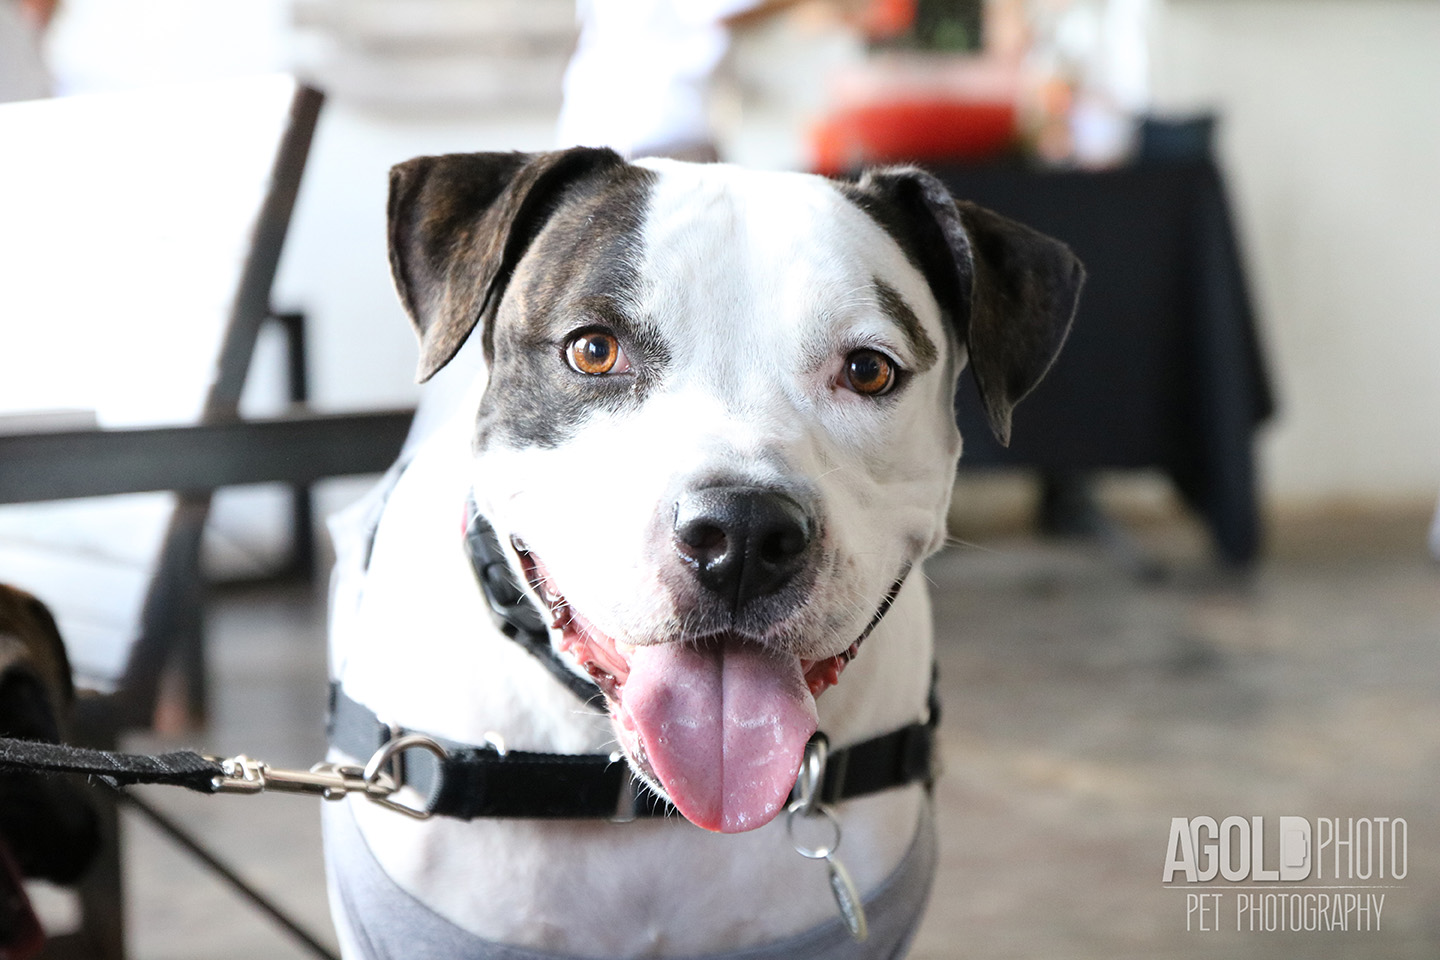 Seminole Heights Pup Crawl_AGoldPhoto Pet Photography_1